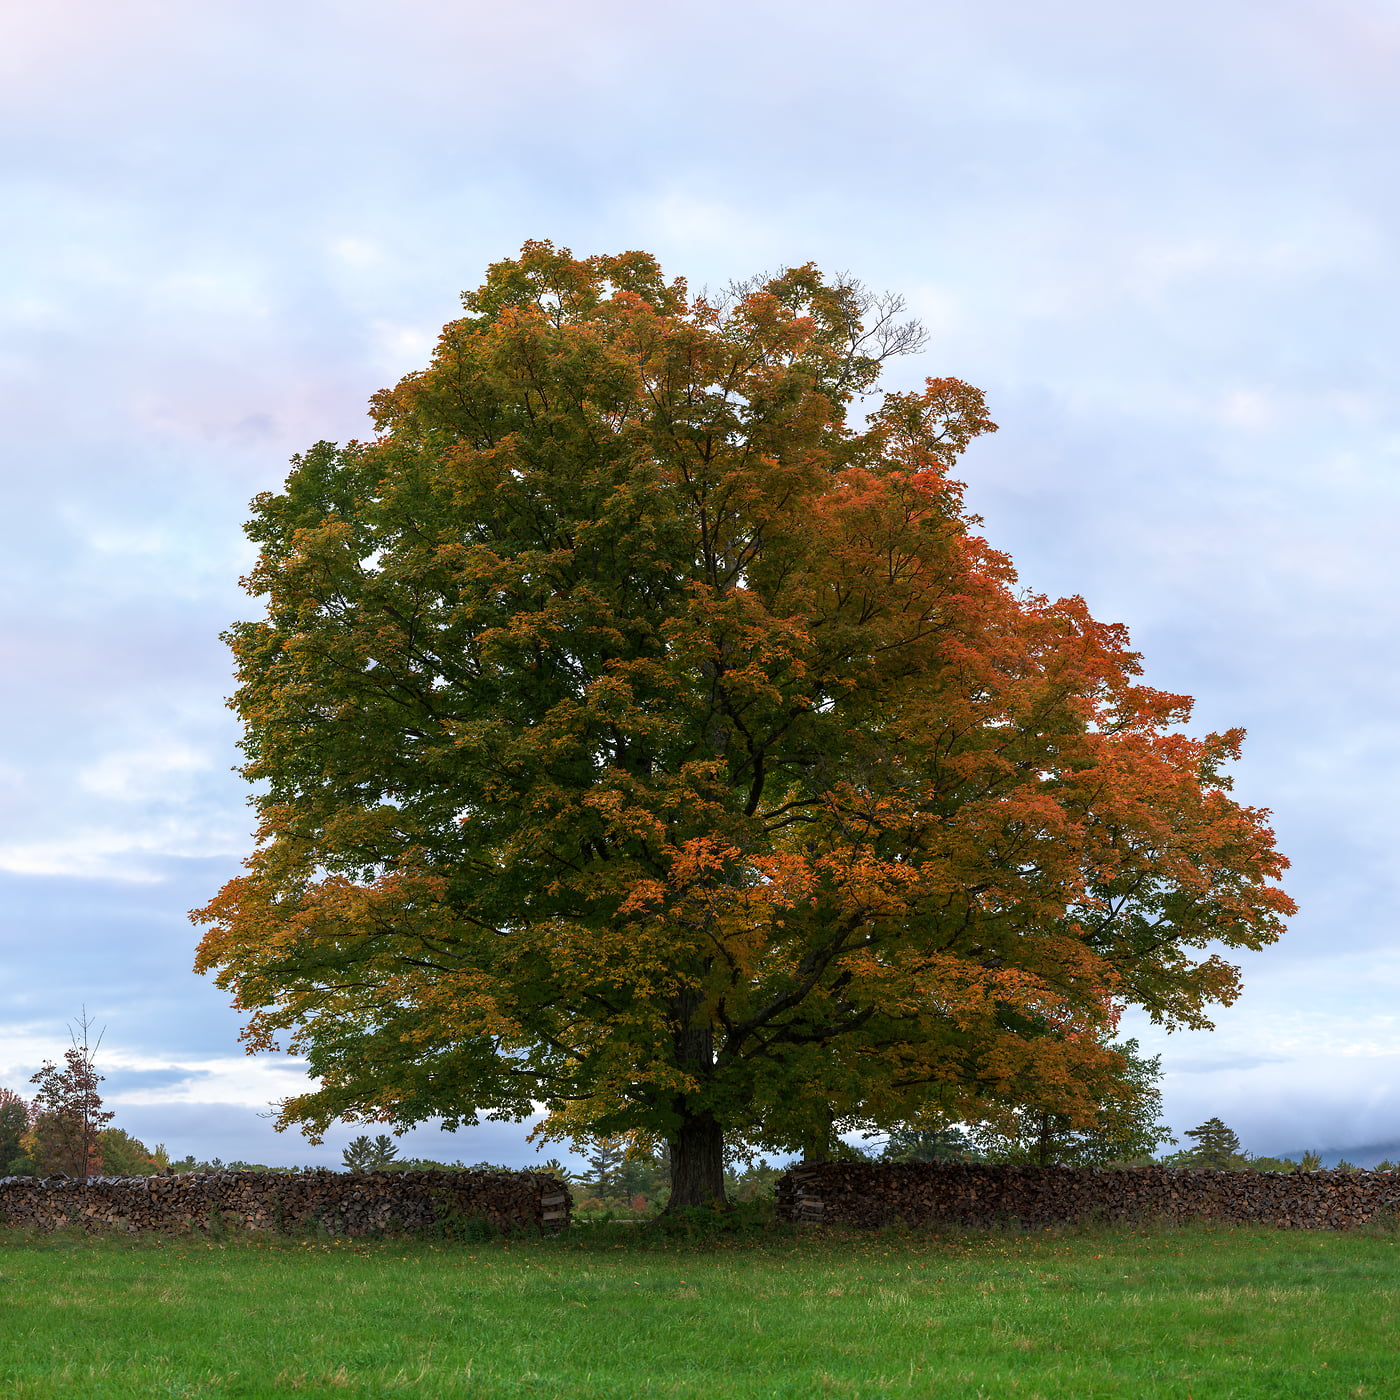 1,244 megapixels! A very high resolution, large-format VAST photo print of a maple tree on a farm in autumn; nature photograph created by Aaron Priest in Muster Field Farm, North Sutton, New Hampshire.